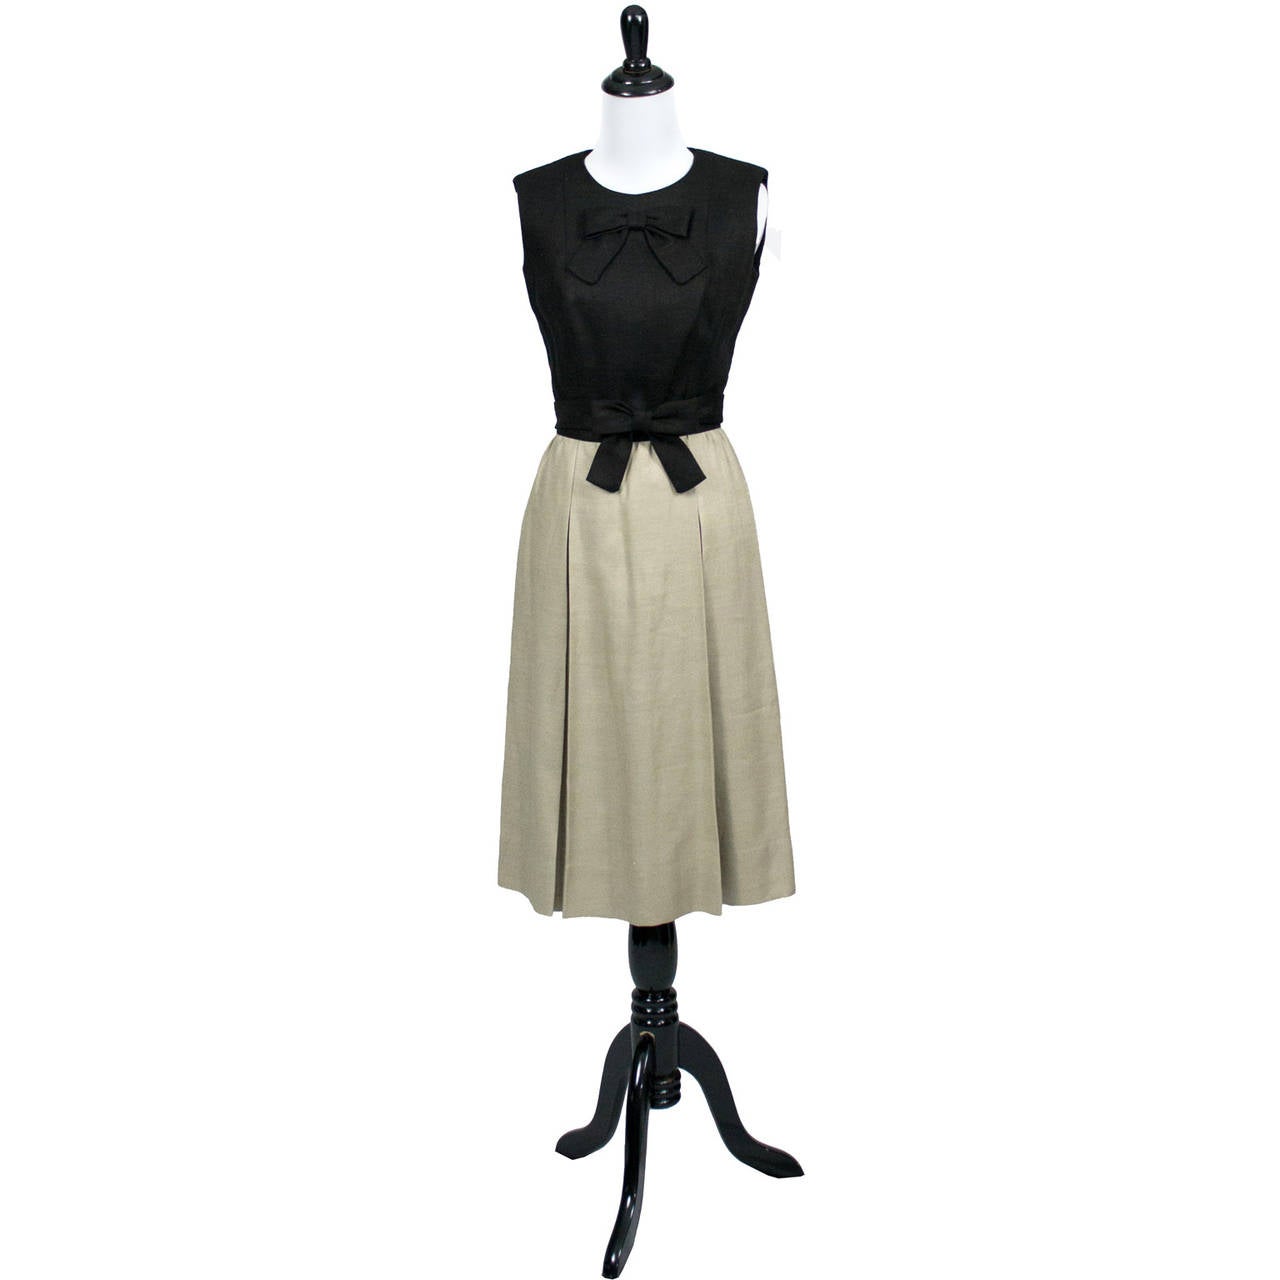 A rare vintage 1960's linen two toned sleeveless dress in mint condition from designer Donald Brooks. This classic vintage dress has a black bodice and taupe linen skirt with original fabric belt and a pretty bow at the waist. There is a back zipper